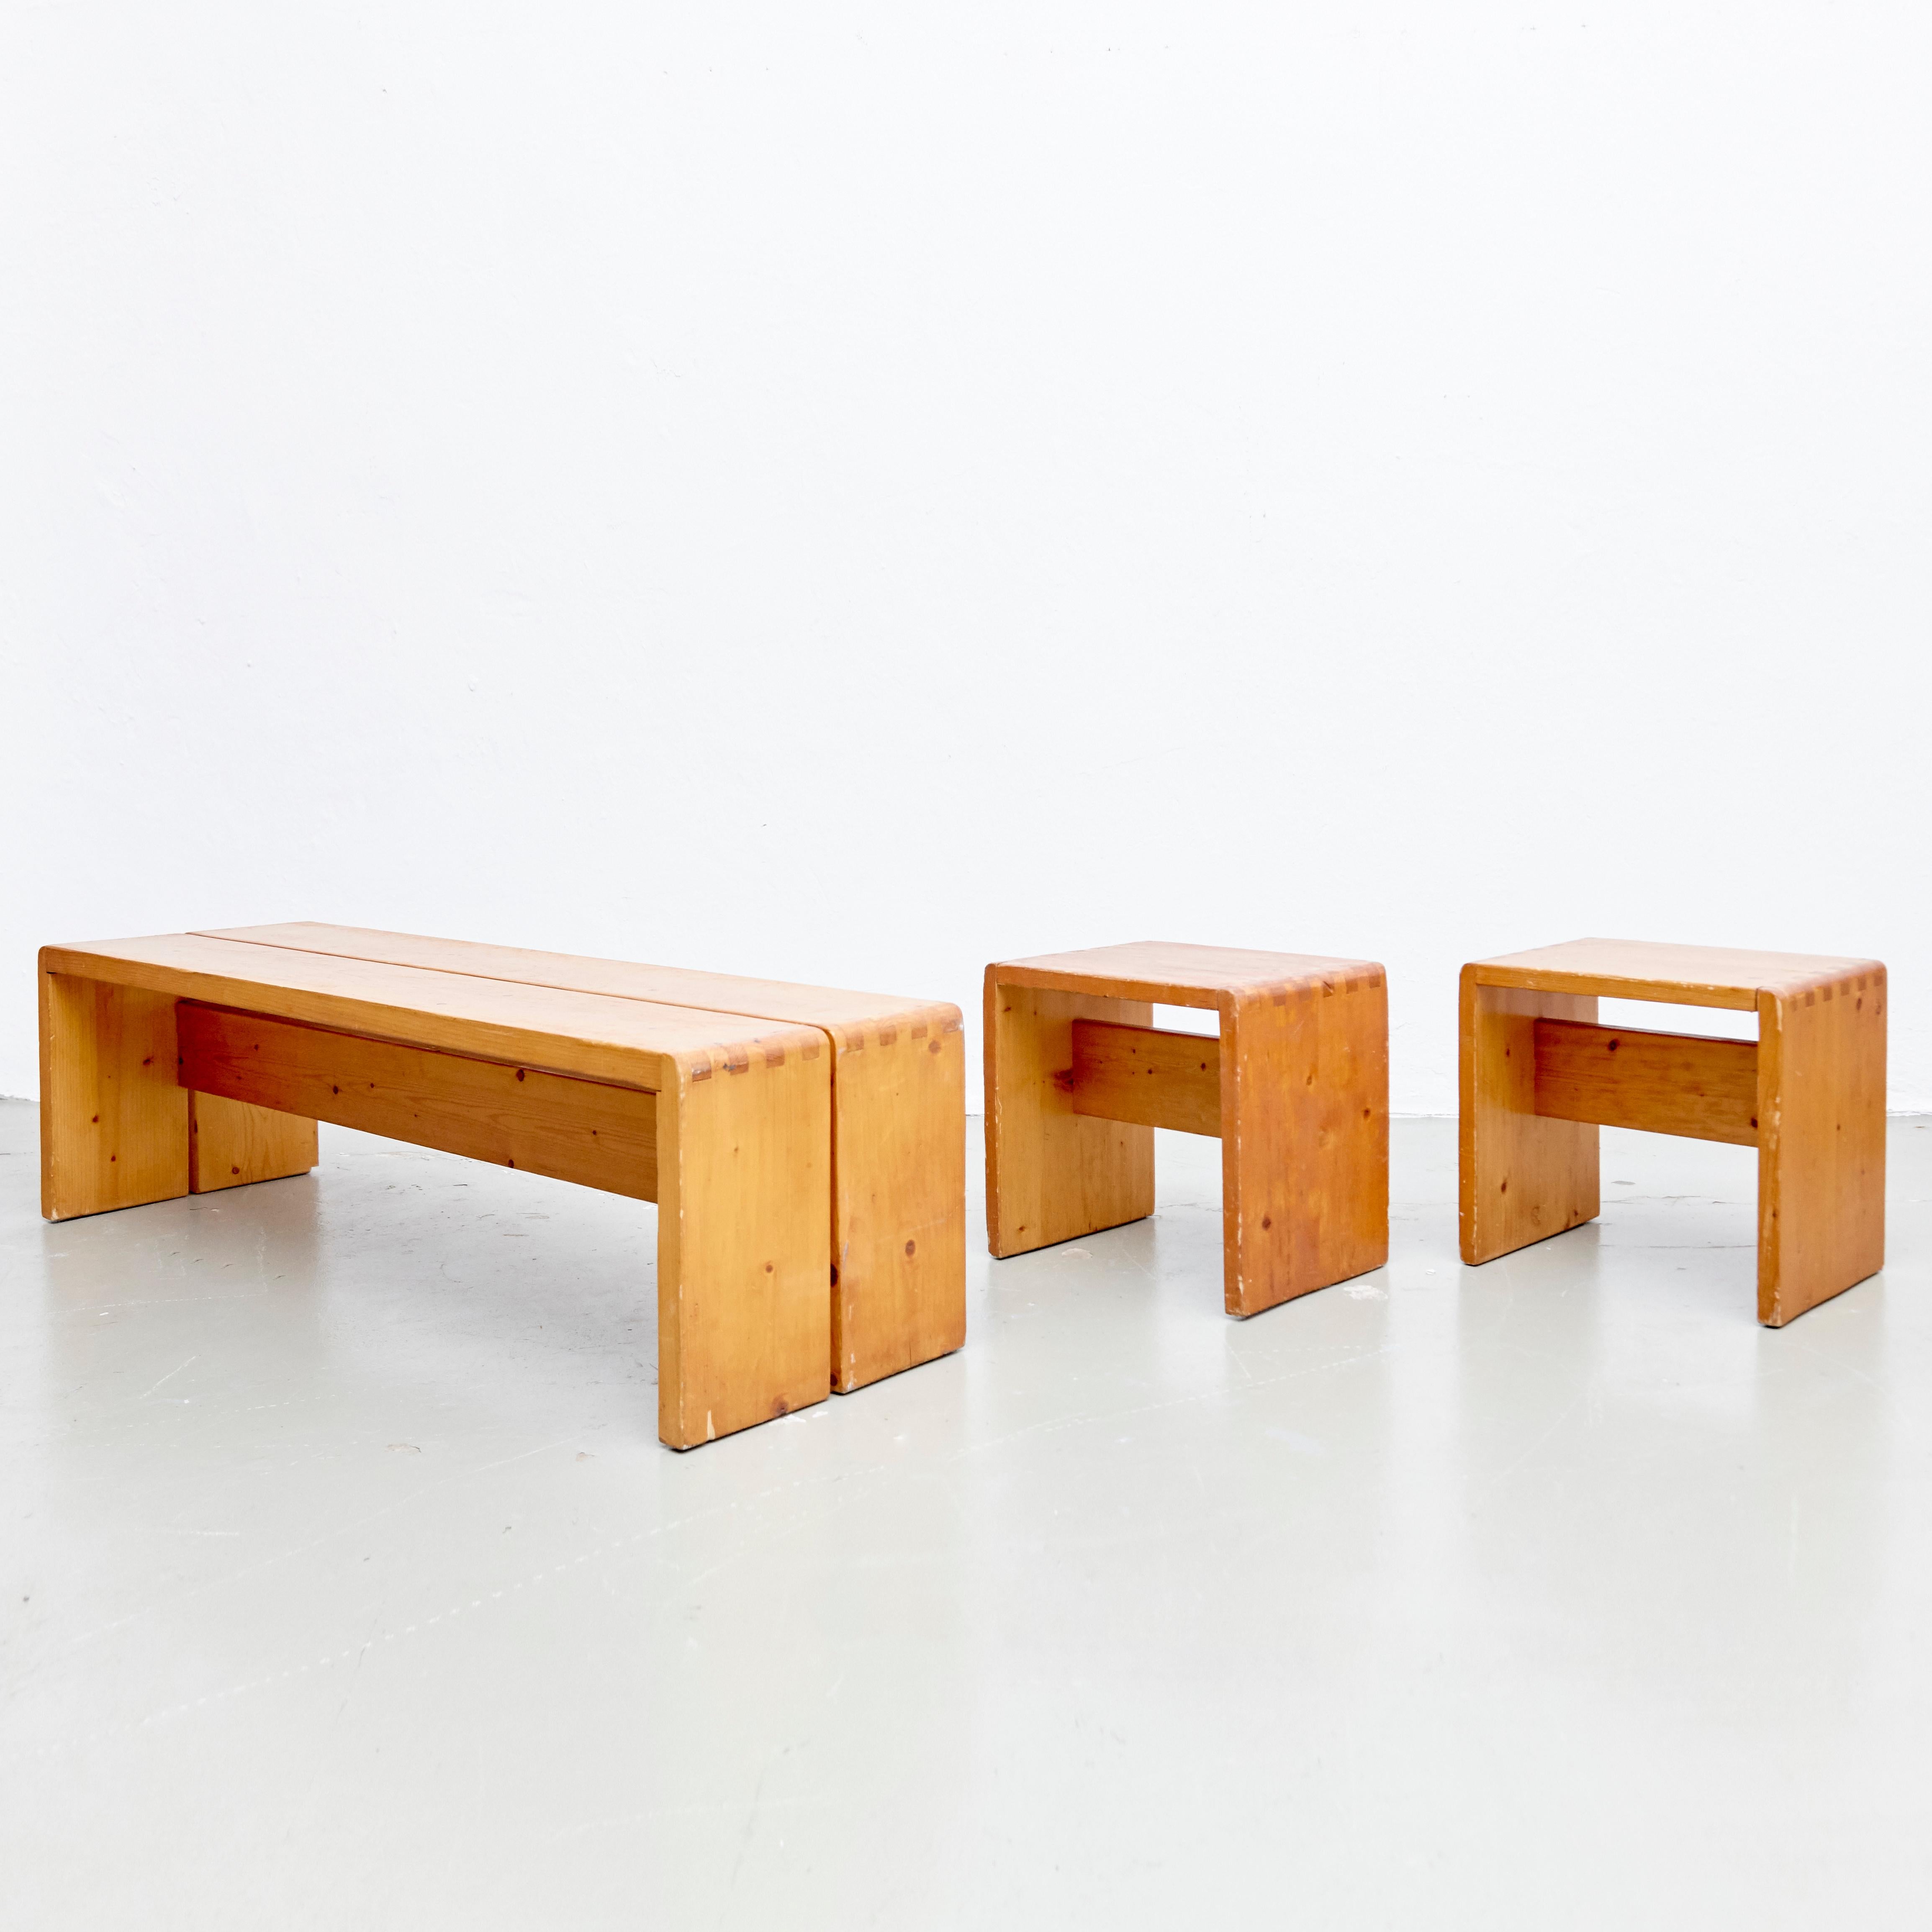 Charlotte Perriand Table, Stools and Bench for Les Arcs 1